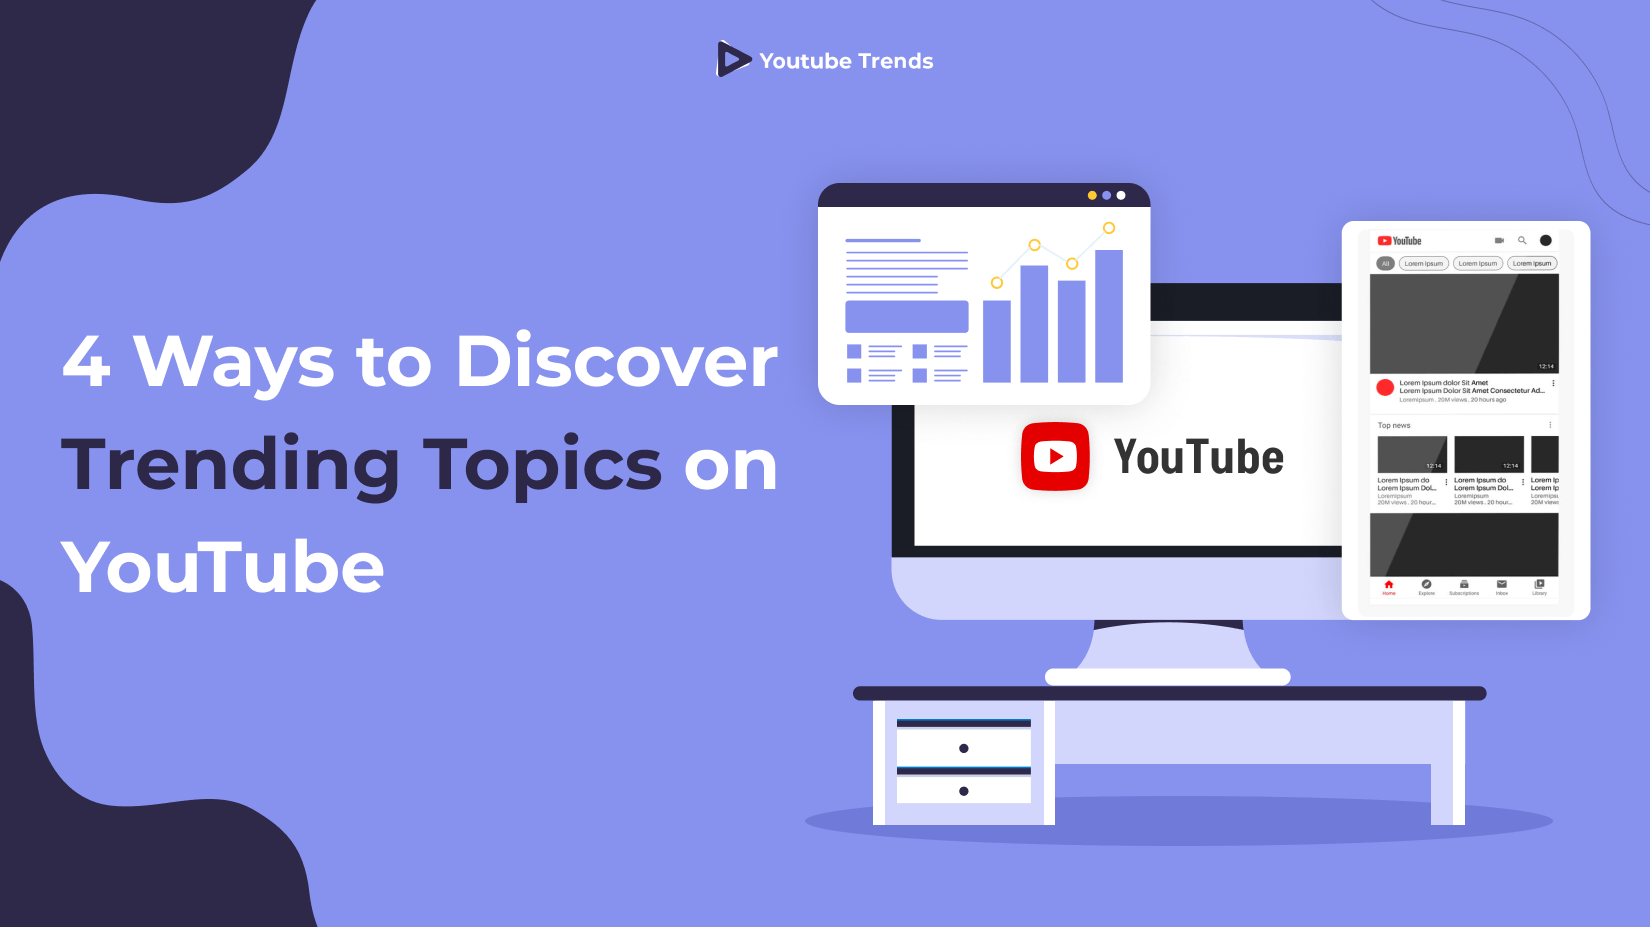 4 Ways to Discover Trending Topics on YouTube